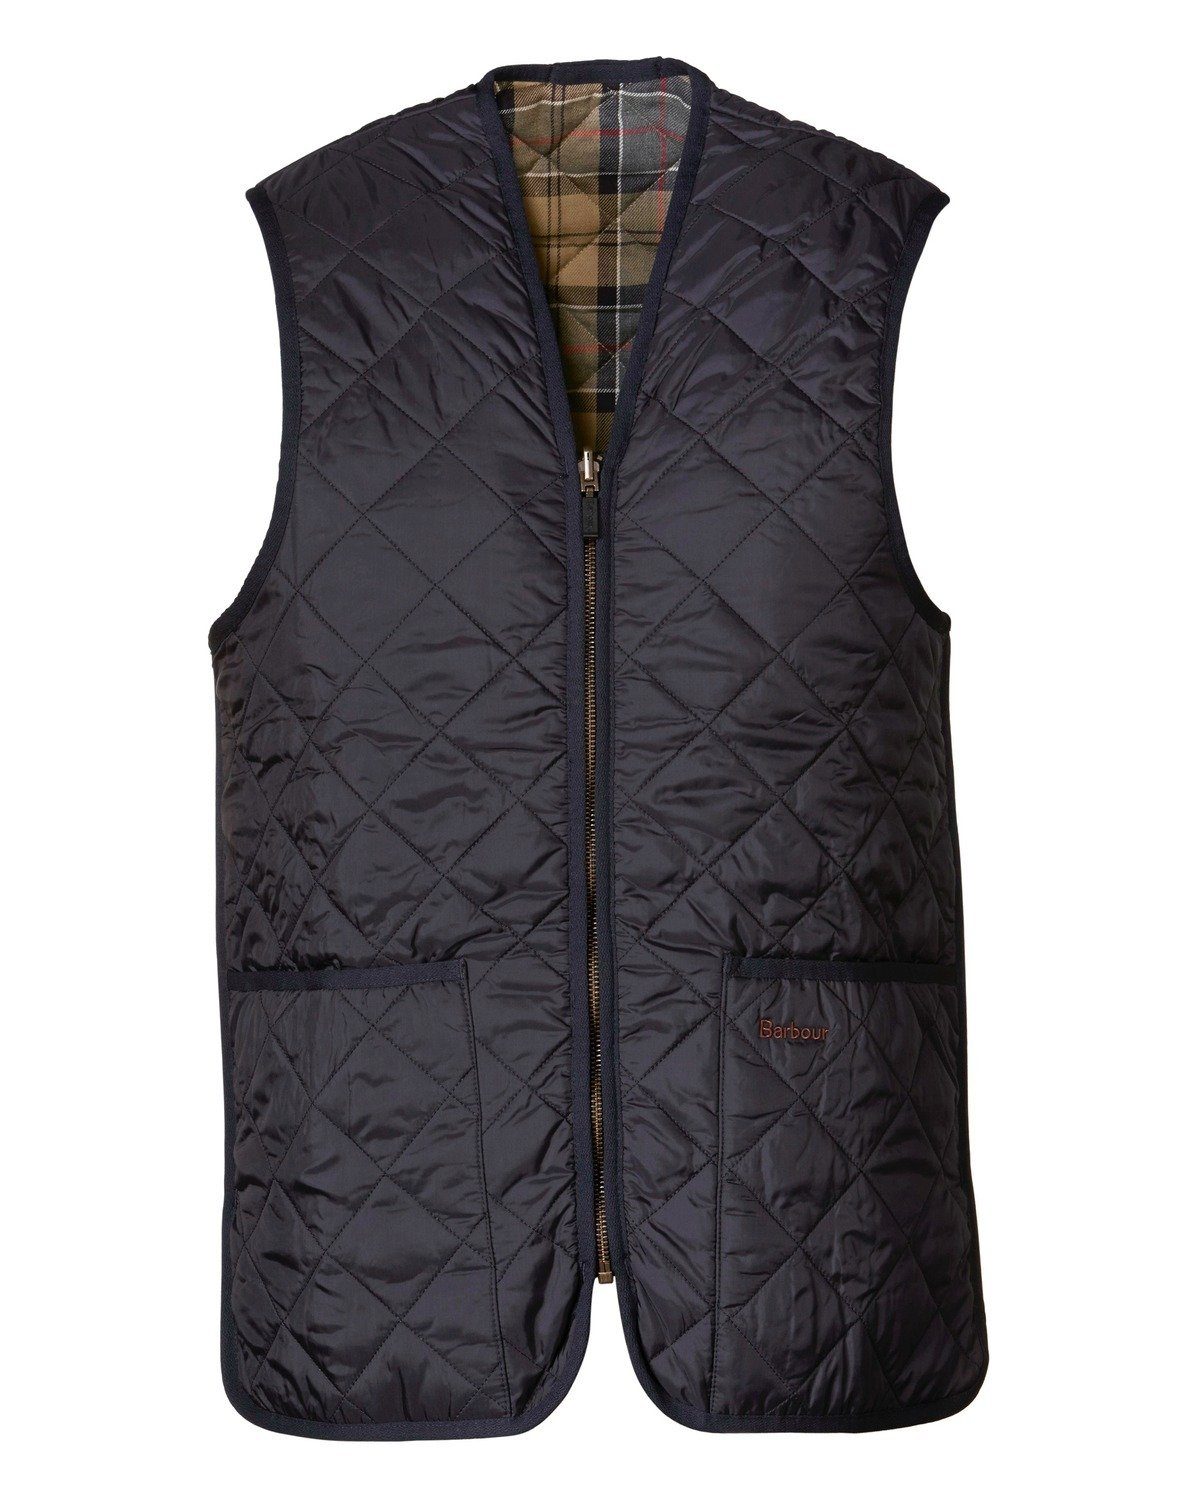 Weste Barbour Quilted Navy Steppweste